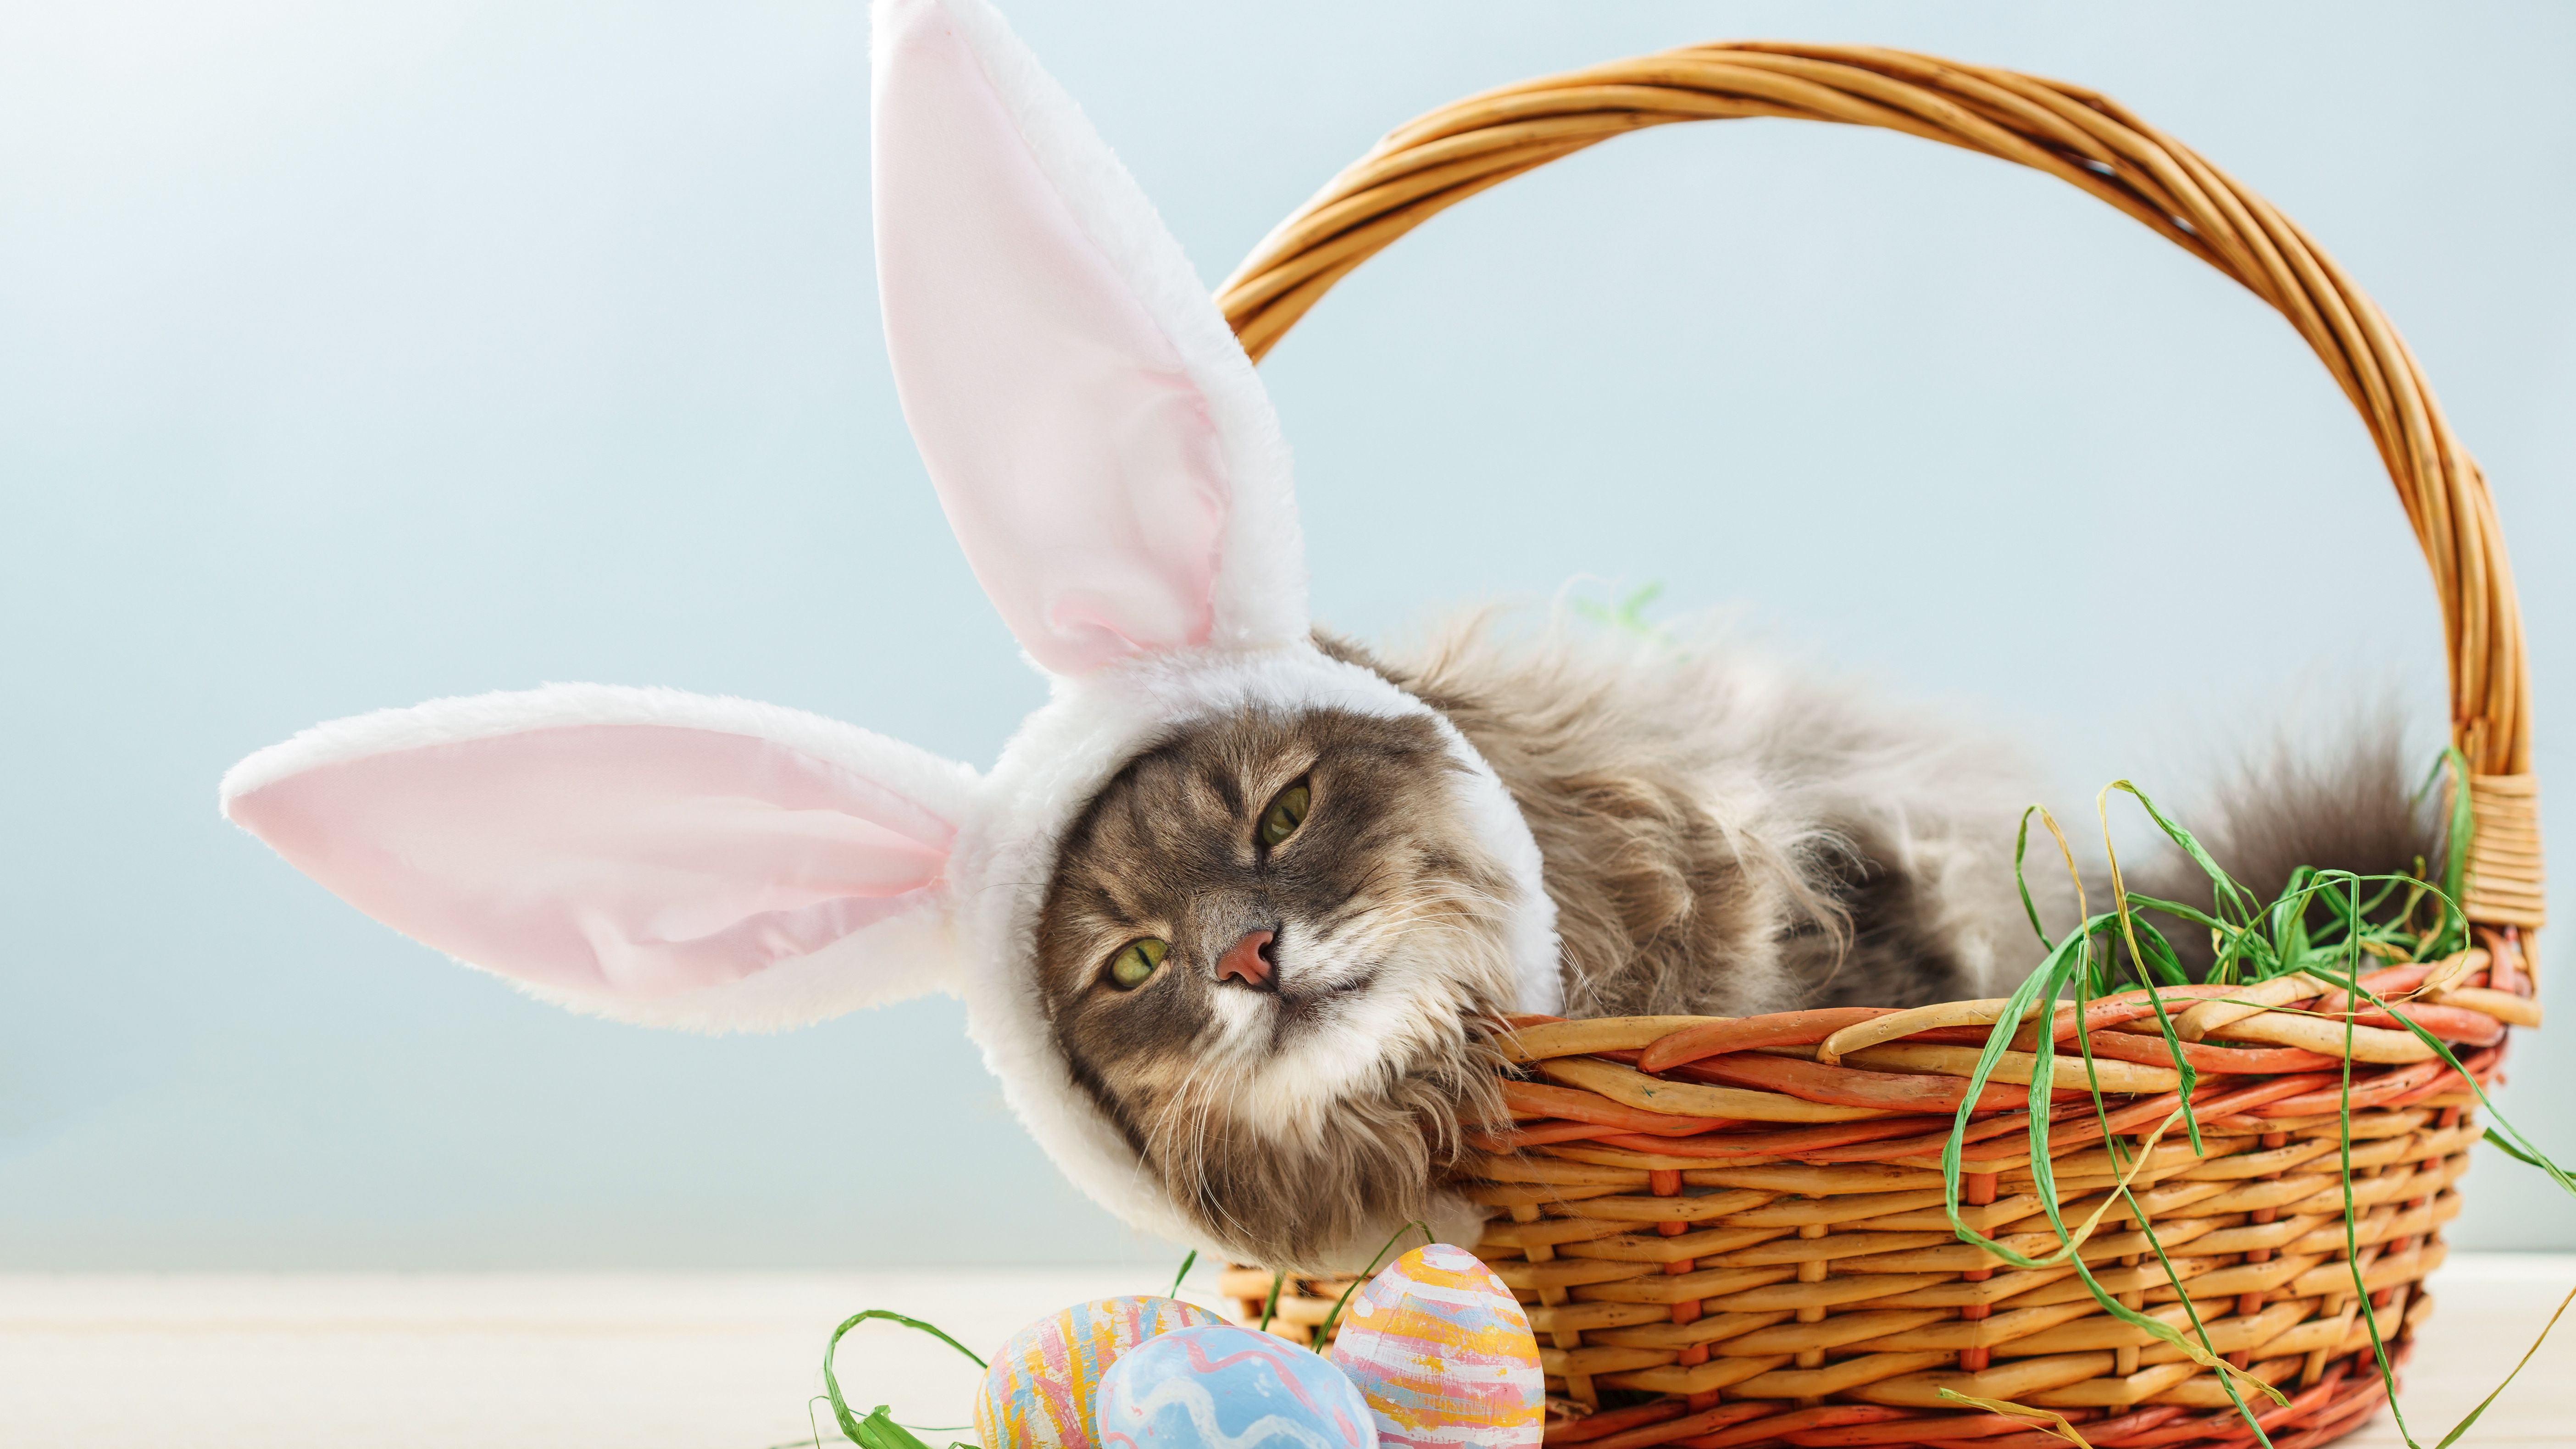 You can get free family and pet photo with the Easter Bunny